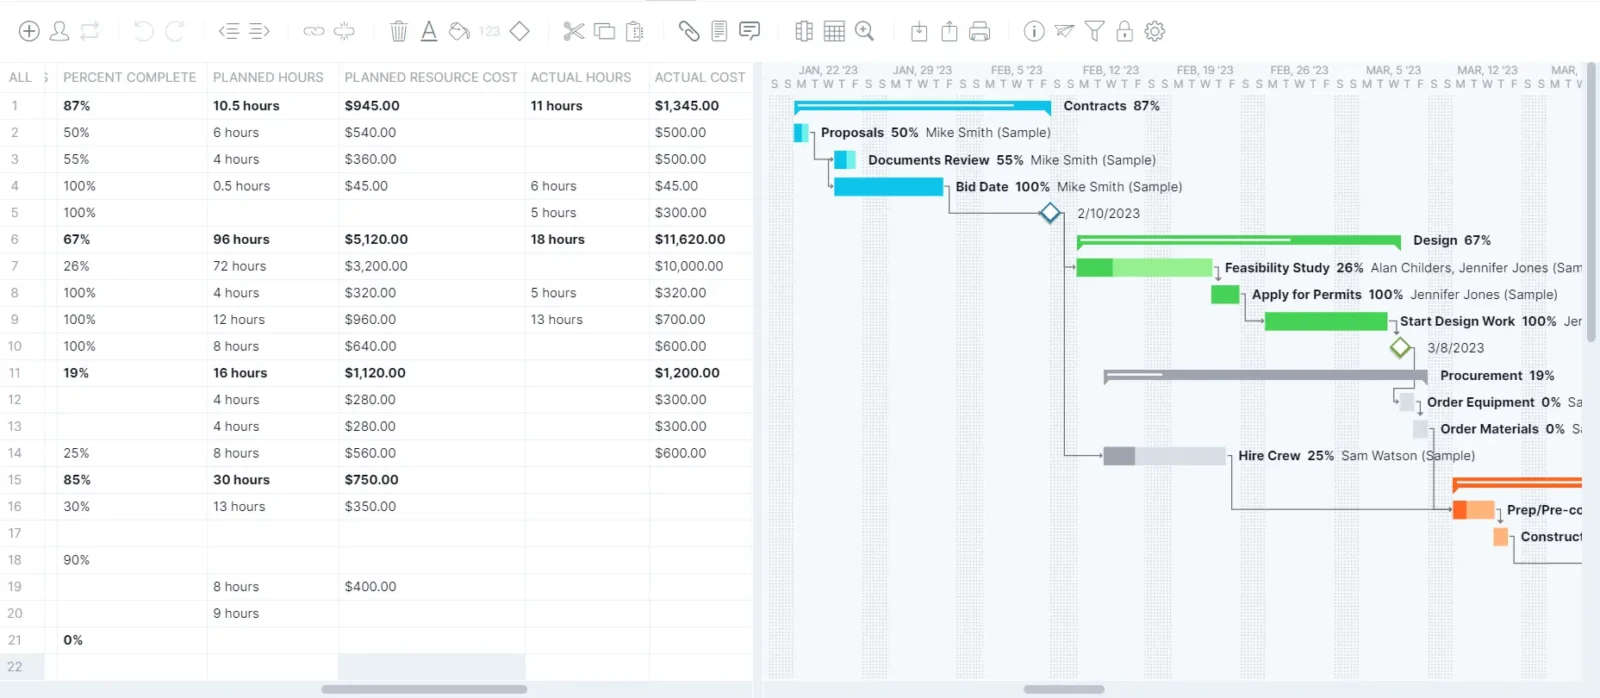 construction Gantt chart showing cost and resource utilization for each project task